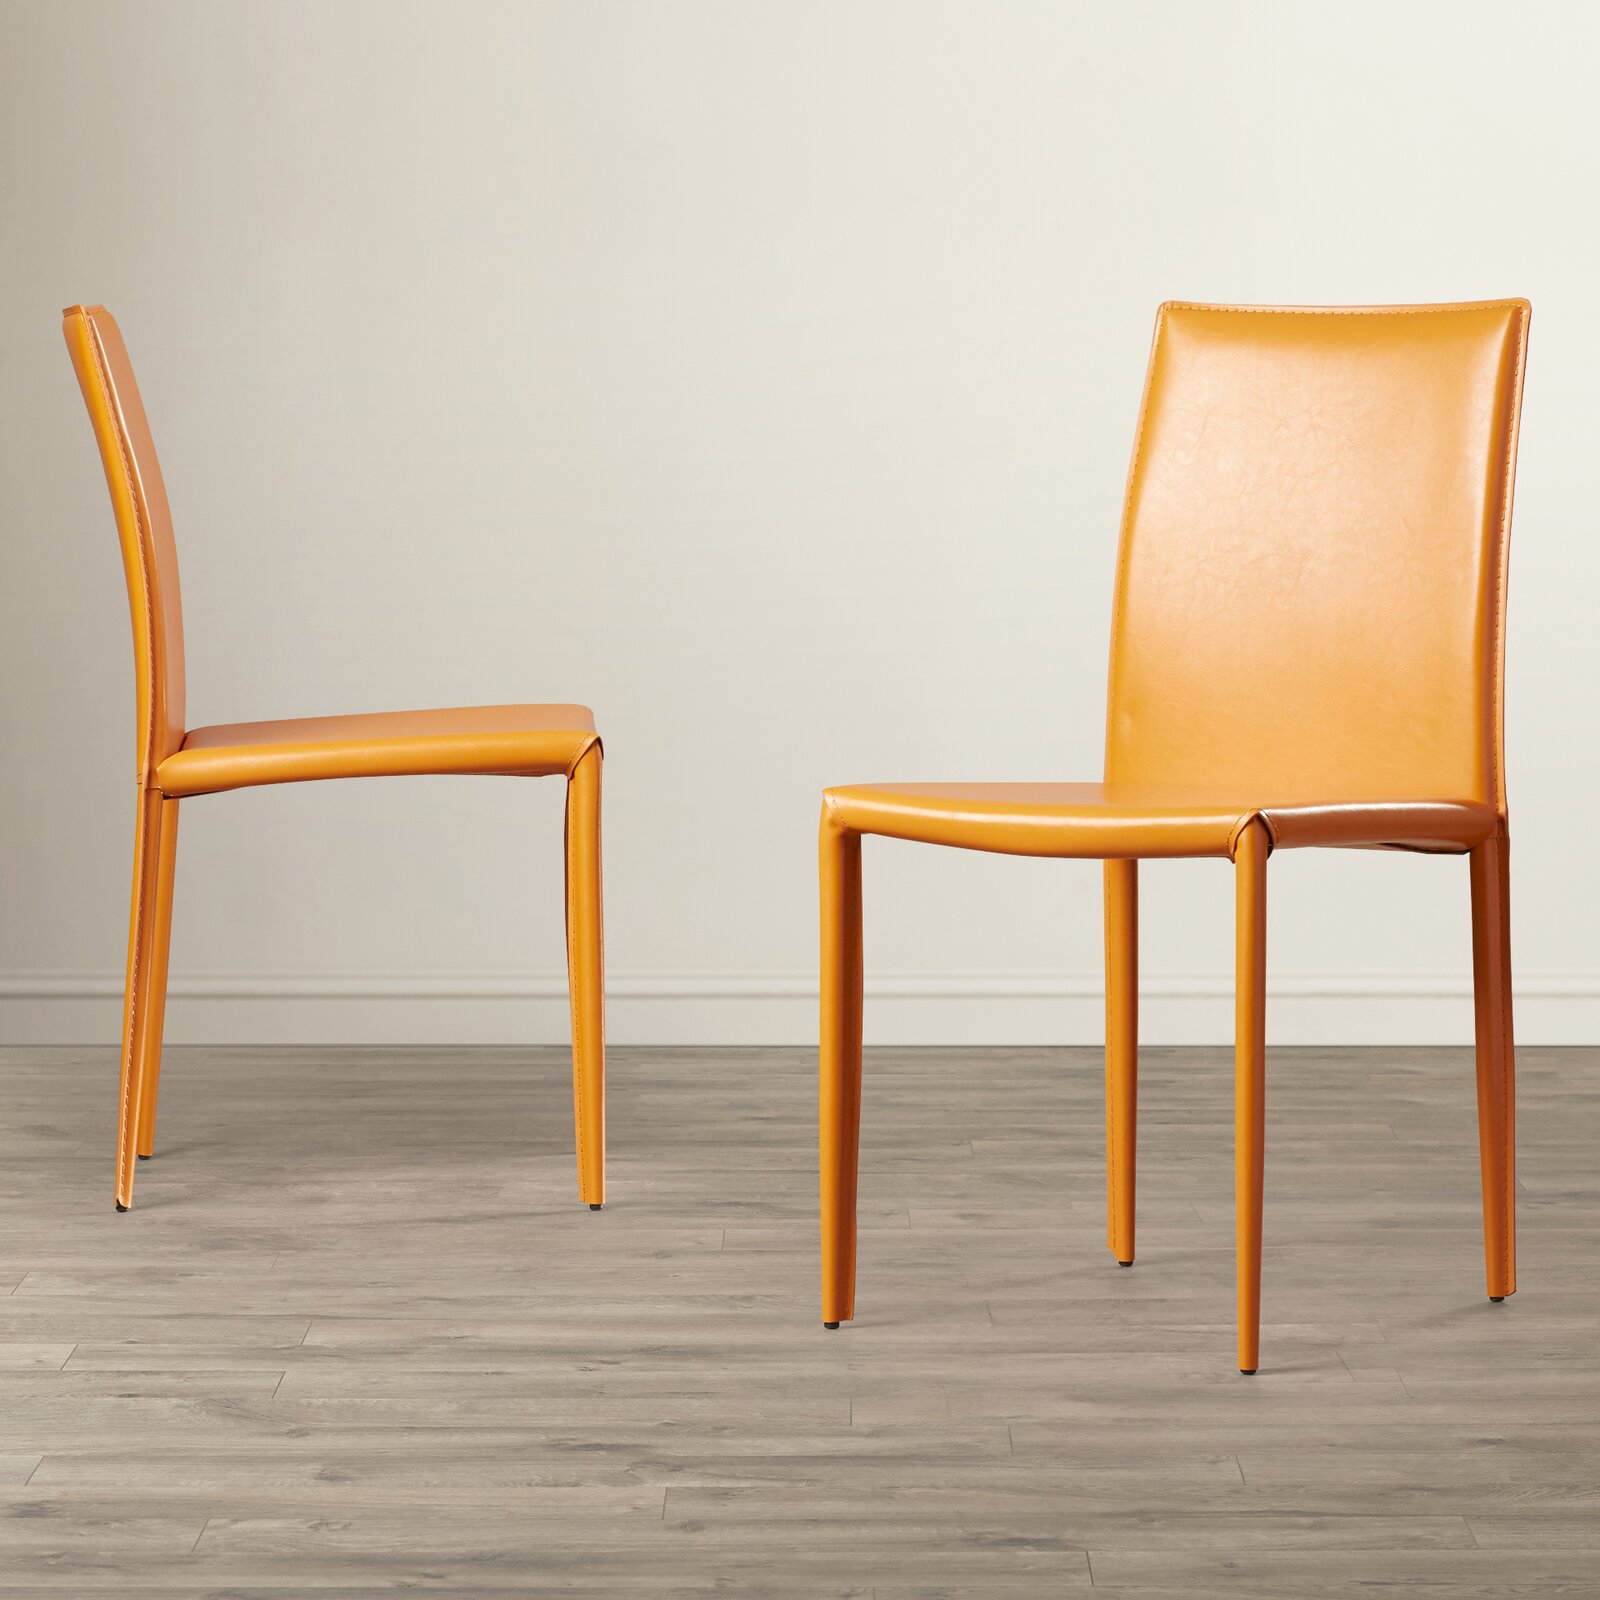 Modern Parsons Dining Chairs, Orange Leather Chairs Dining